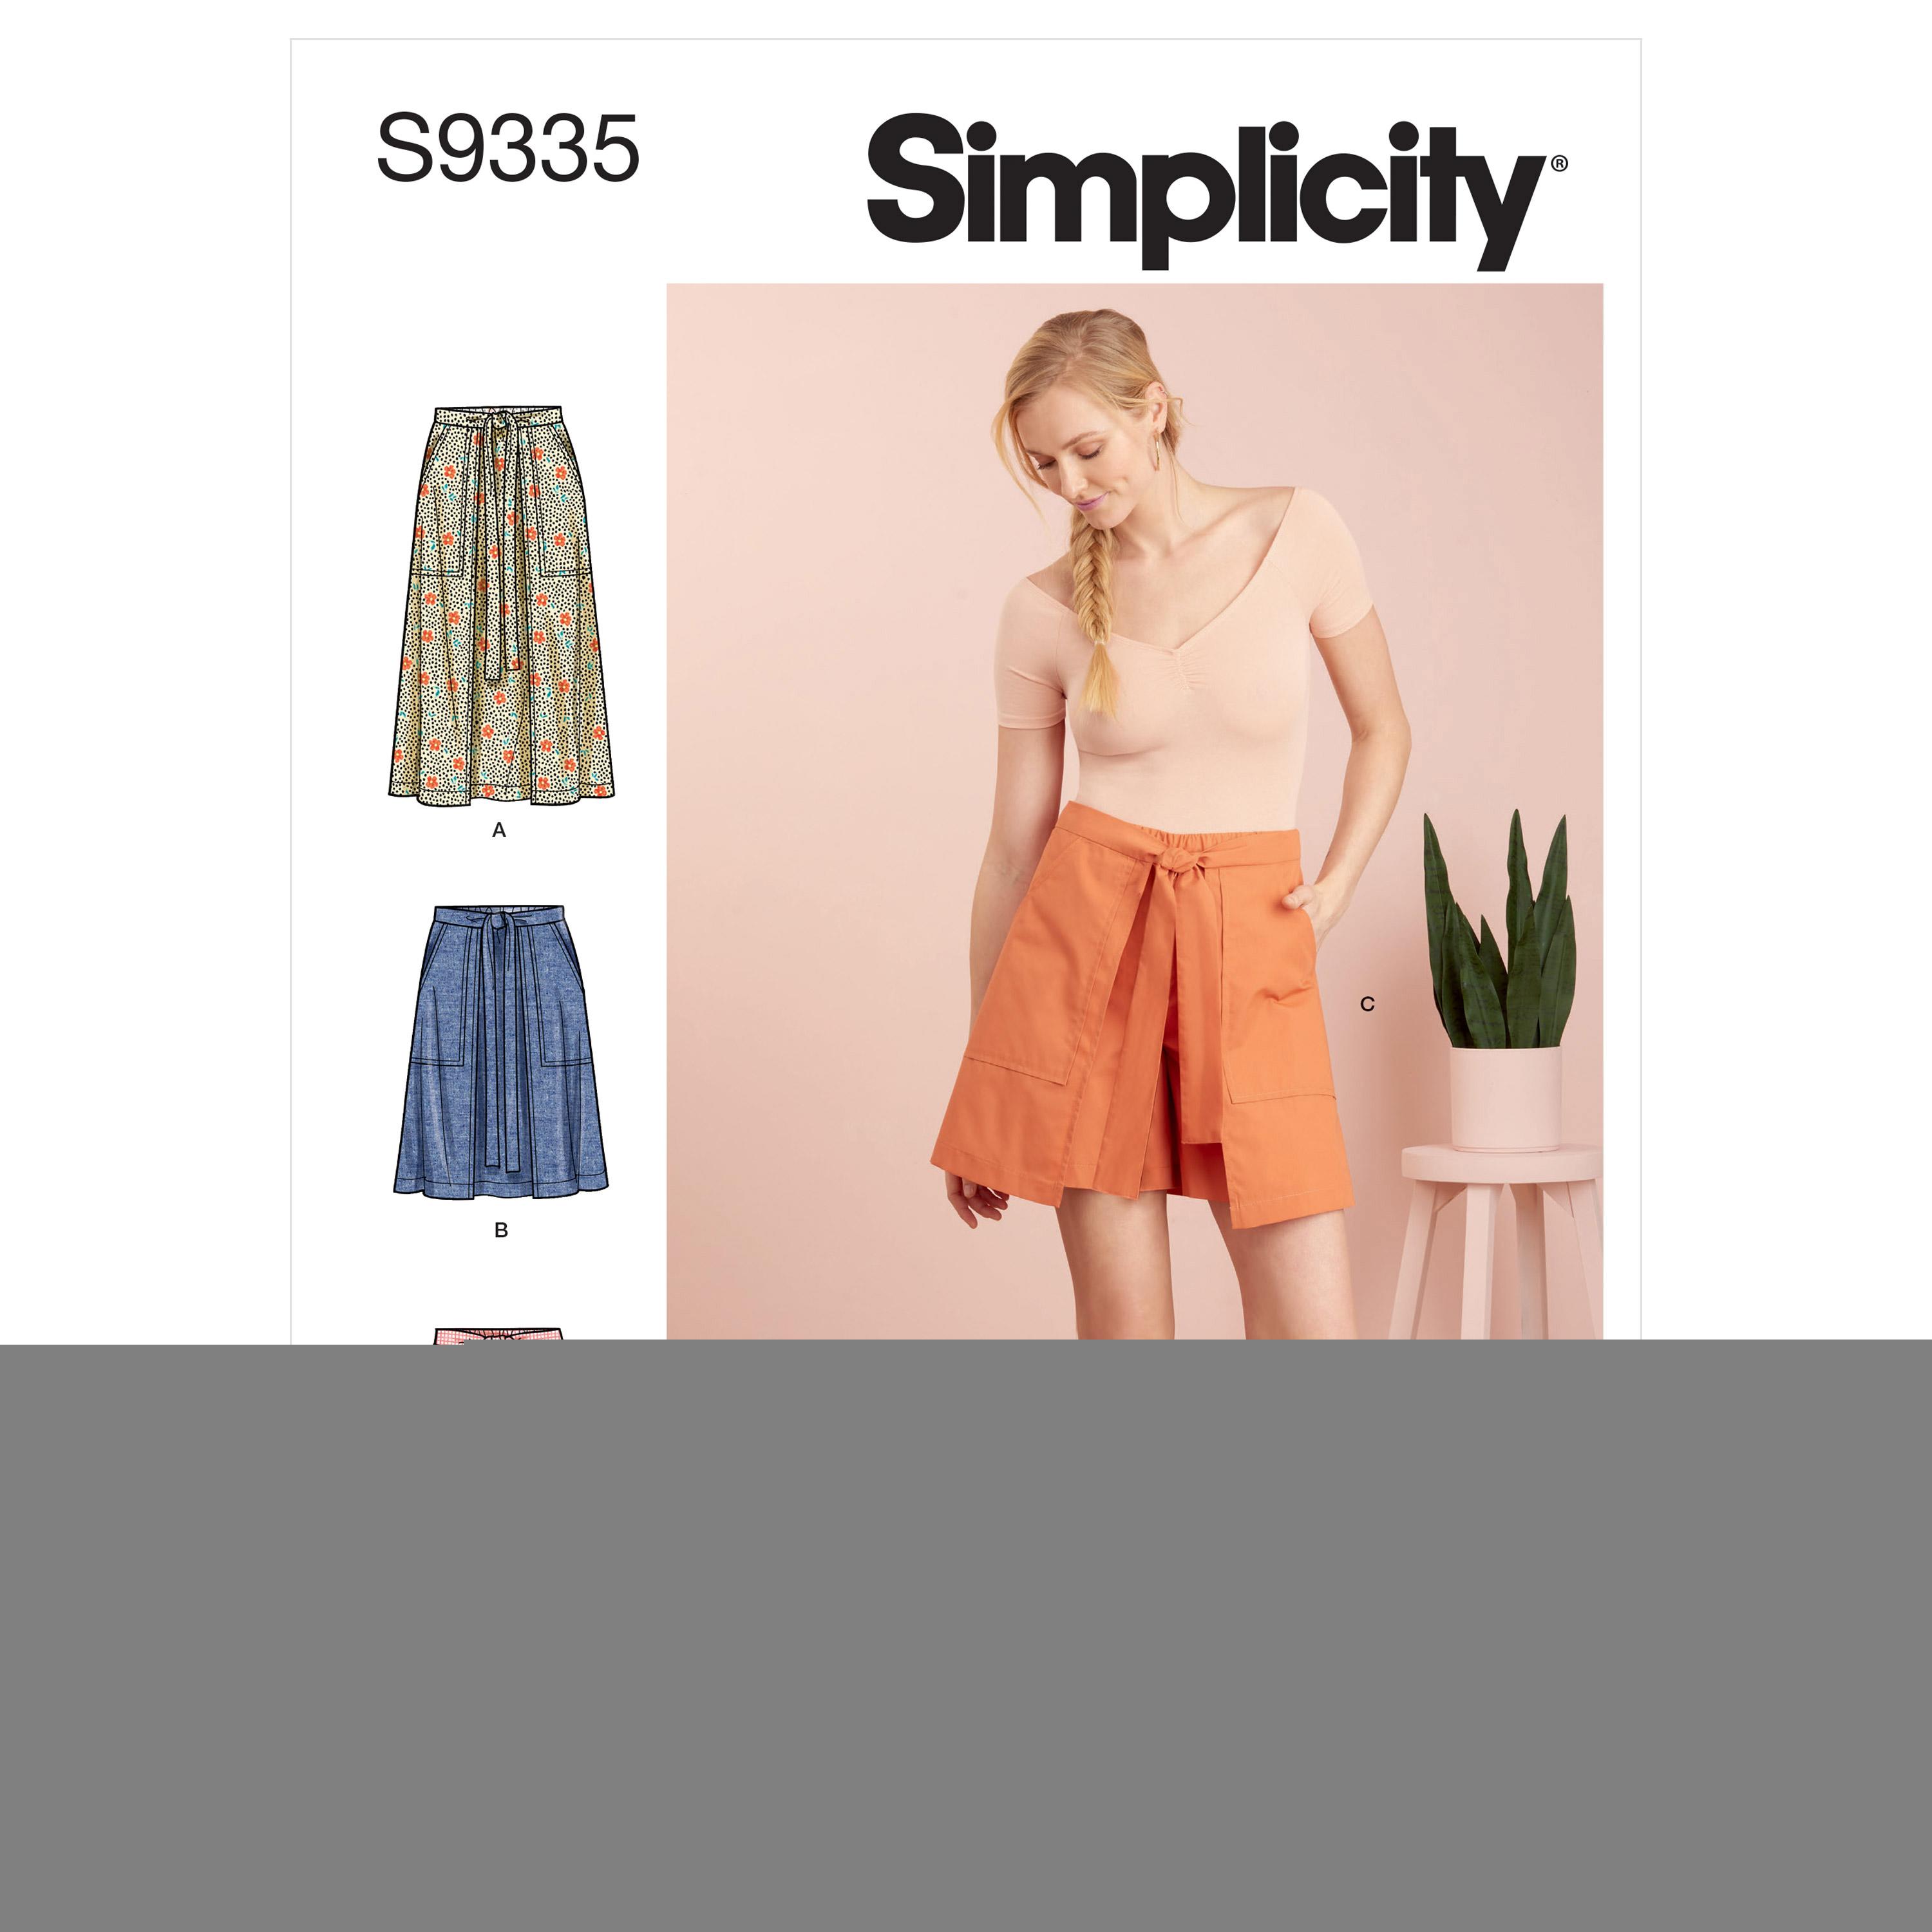 Simplicity Sewing Pattern S9335 Misses' Skirts in Two Lengths and Skort